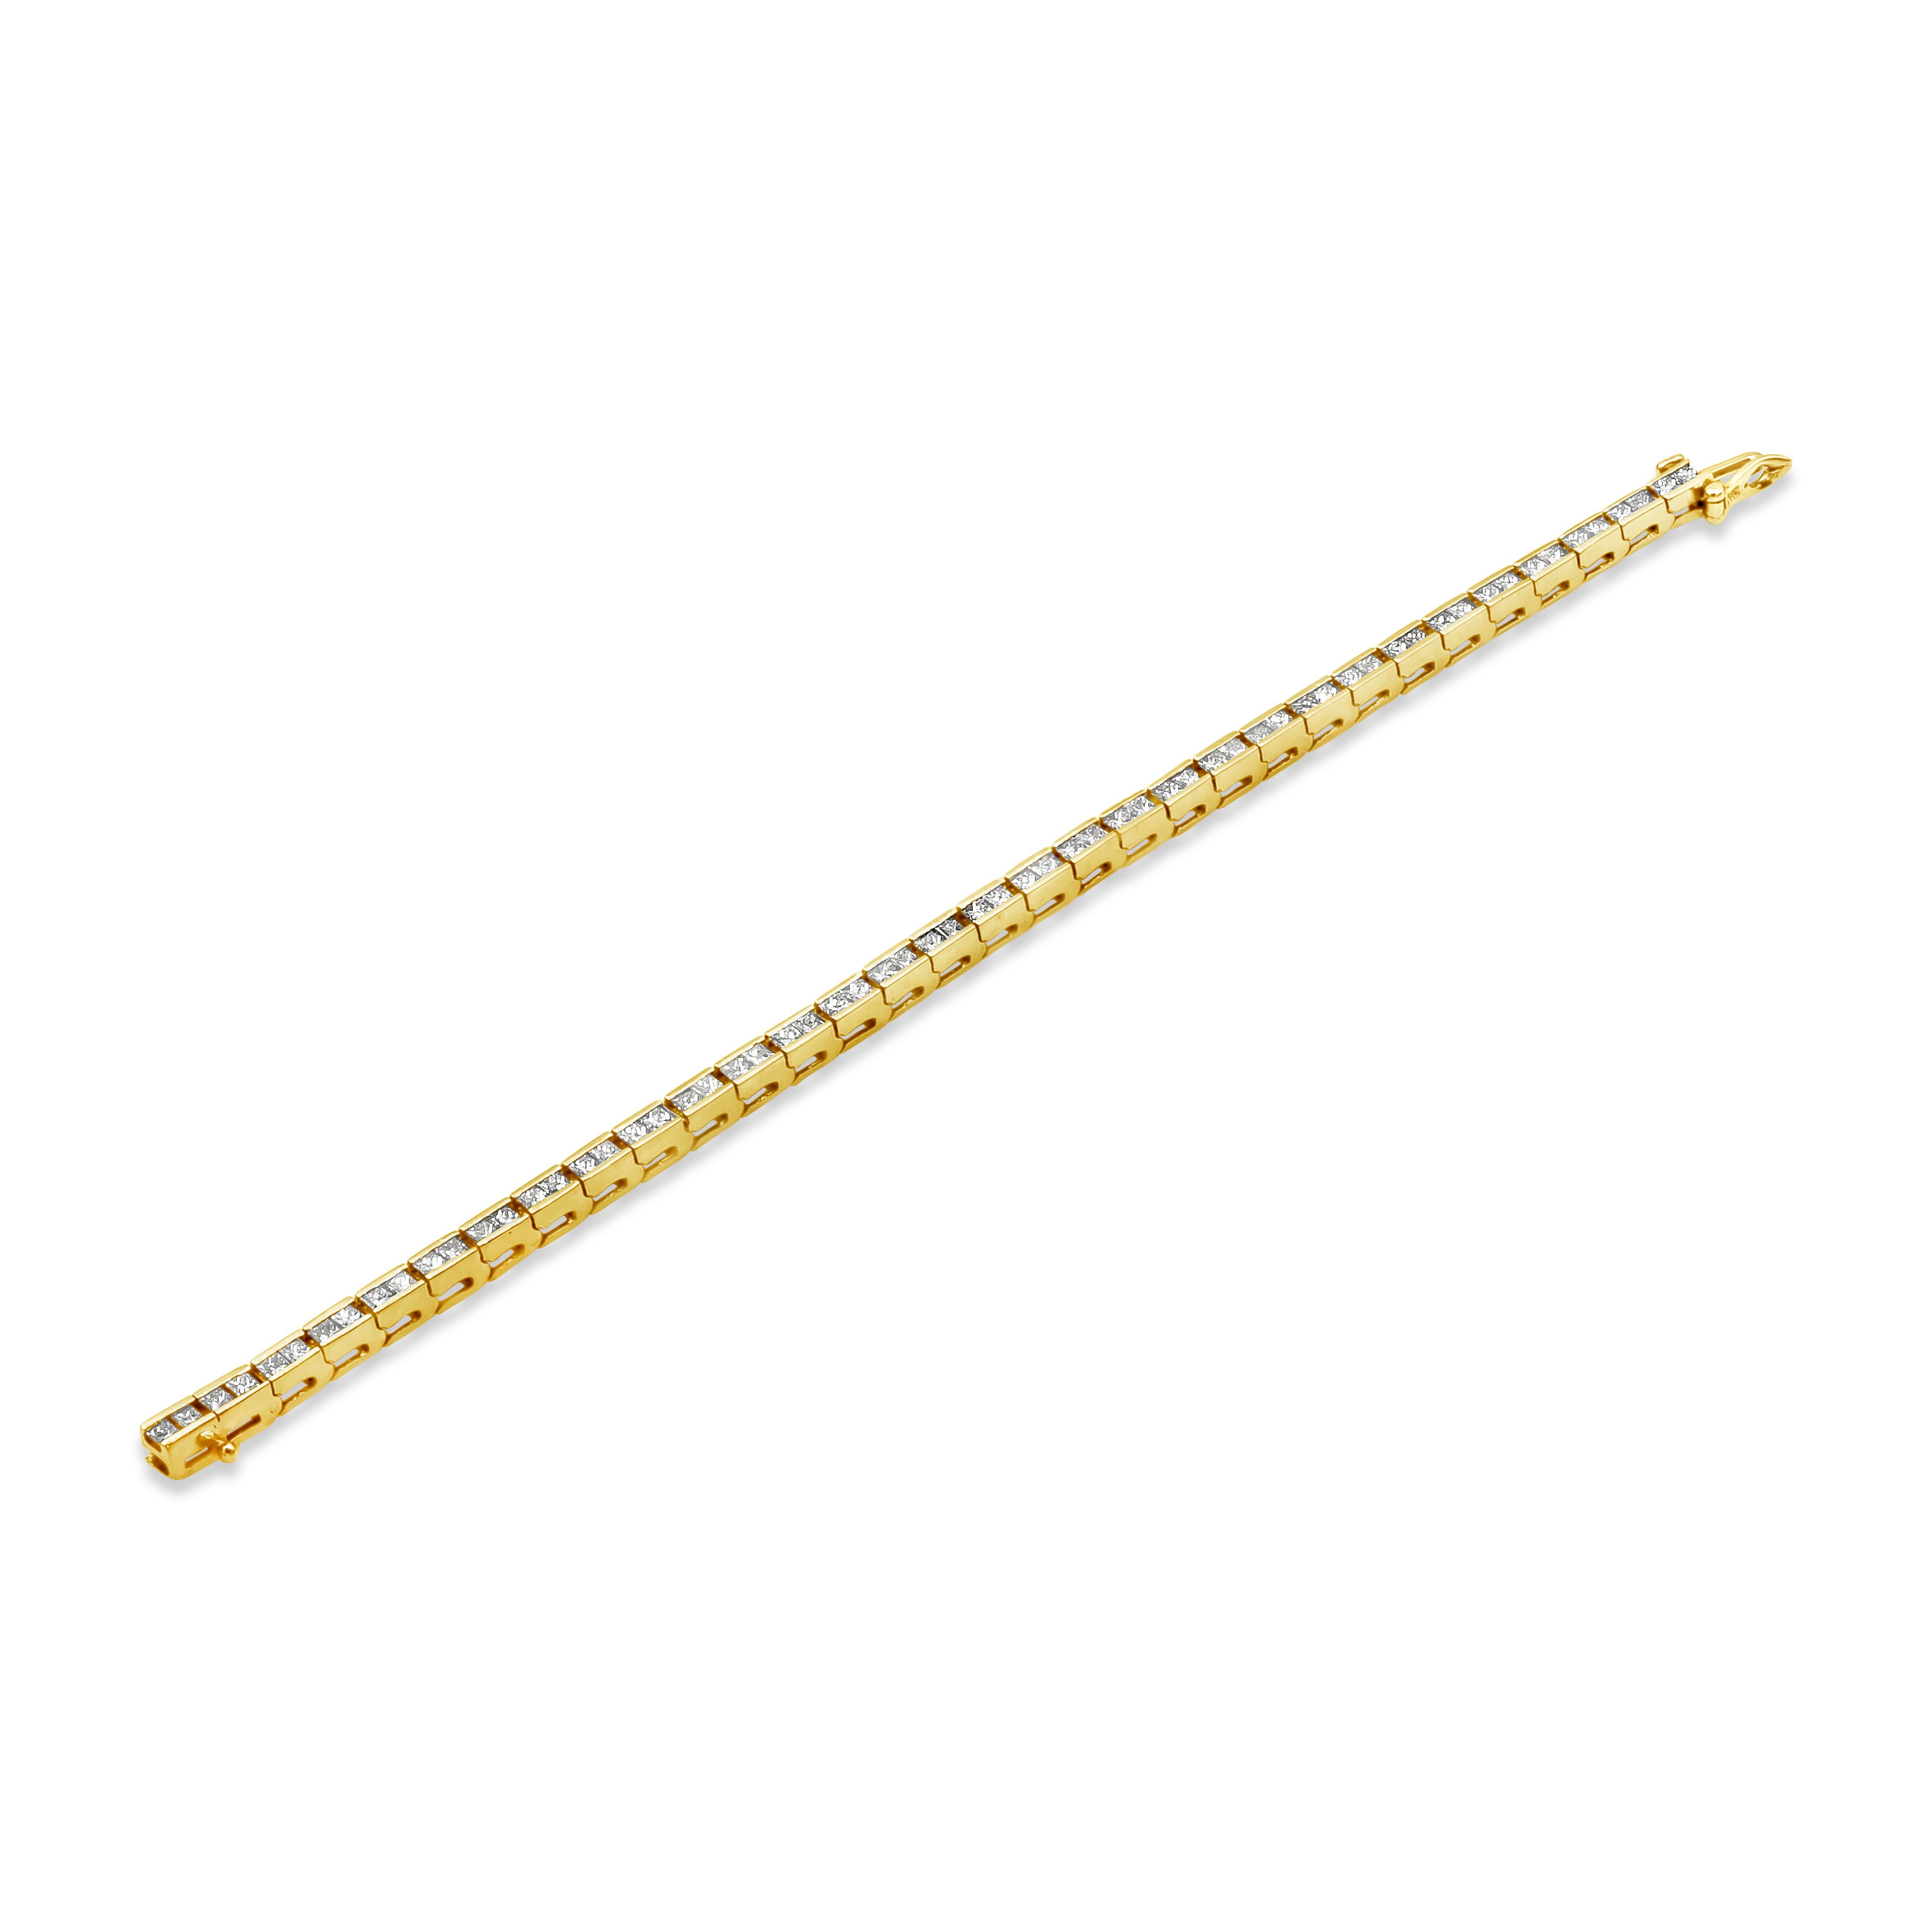 This classic tennis bracelet showcases 64 princess cut diamonds weighing a total of 4.30 carats. Mounted in a channel setting and made in 14K Yellow Gold, 7 inches in Length.

Roman Malakov is a custom house, specializing in creating anything you